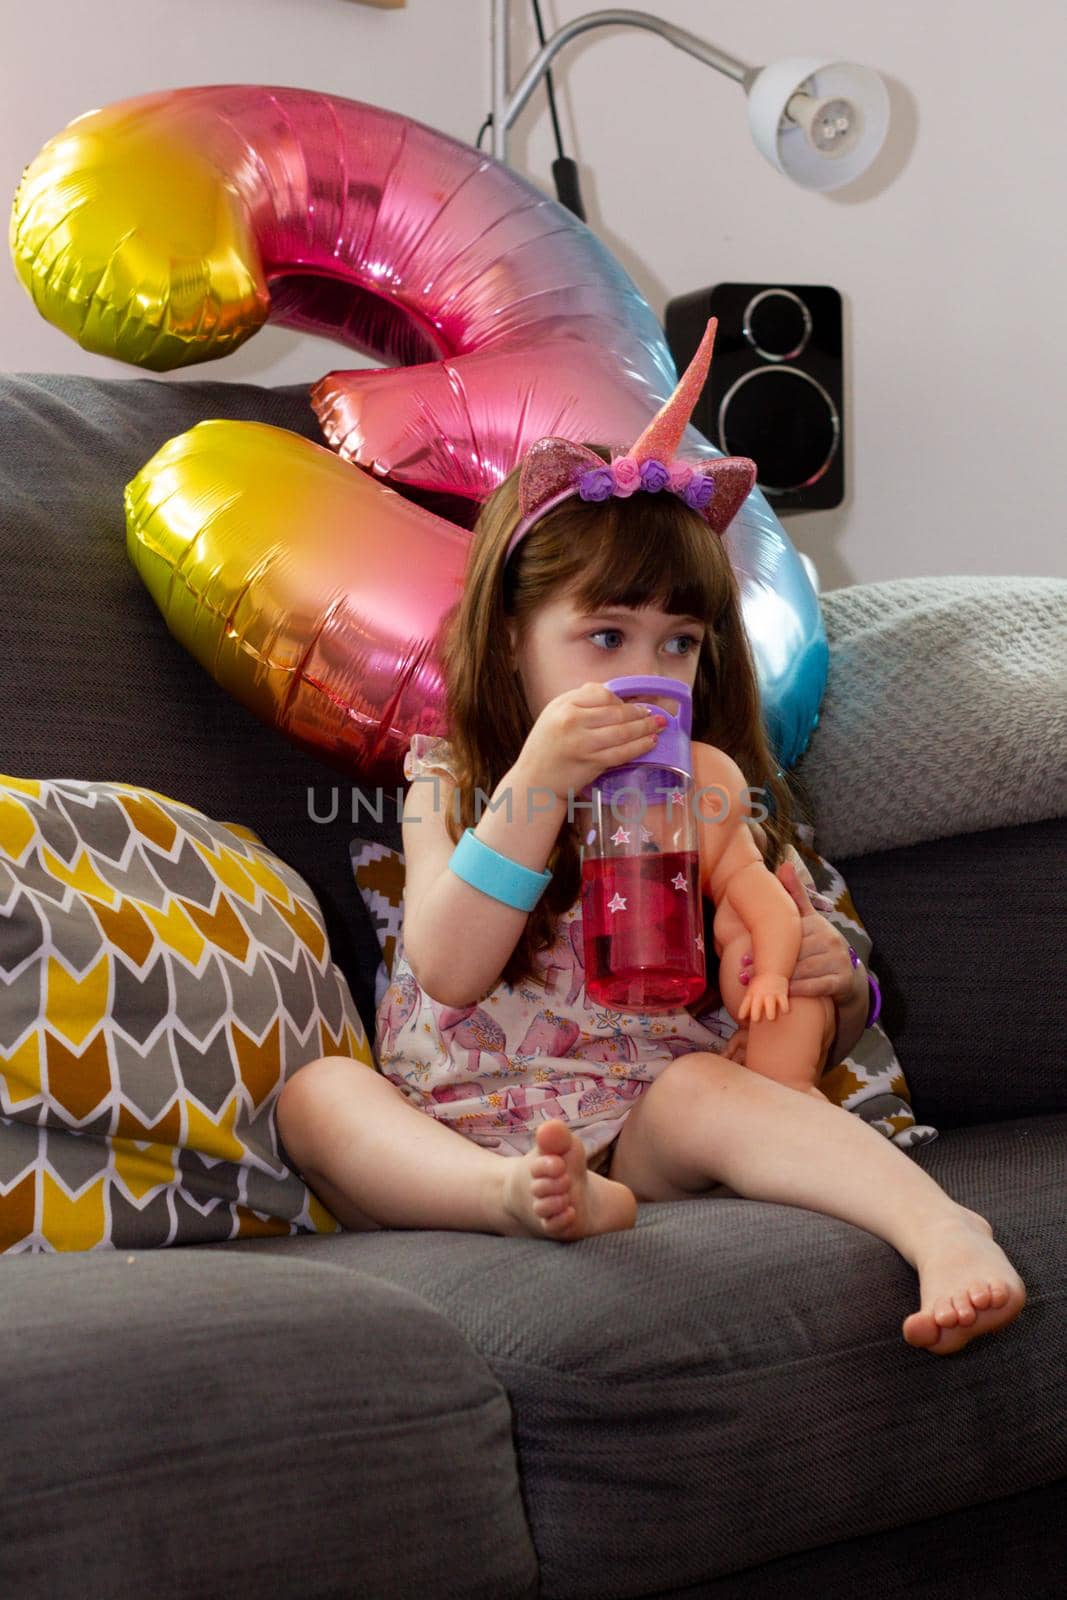 A Cute Baby Girl Sitting On A Sofa With A Colourful Balloon And A Doll by AlbertoPascual